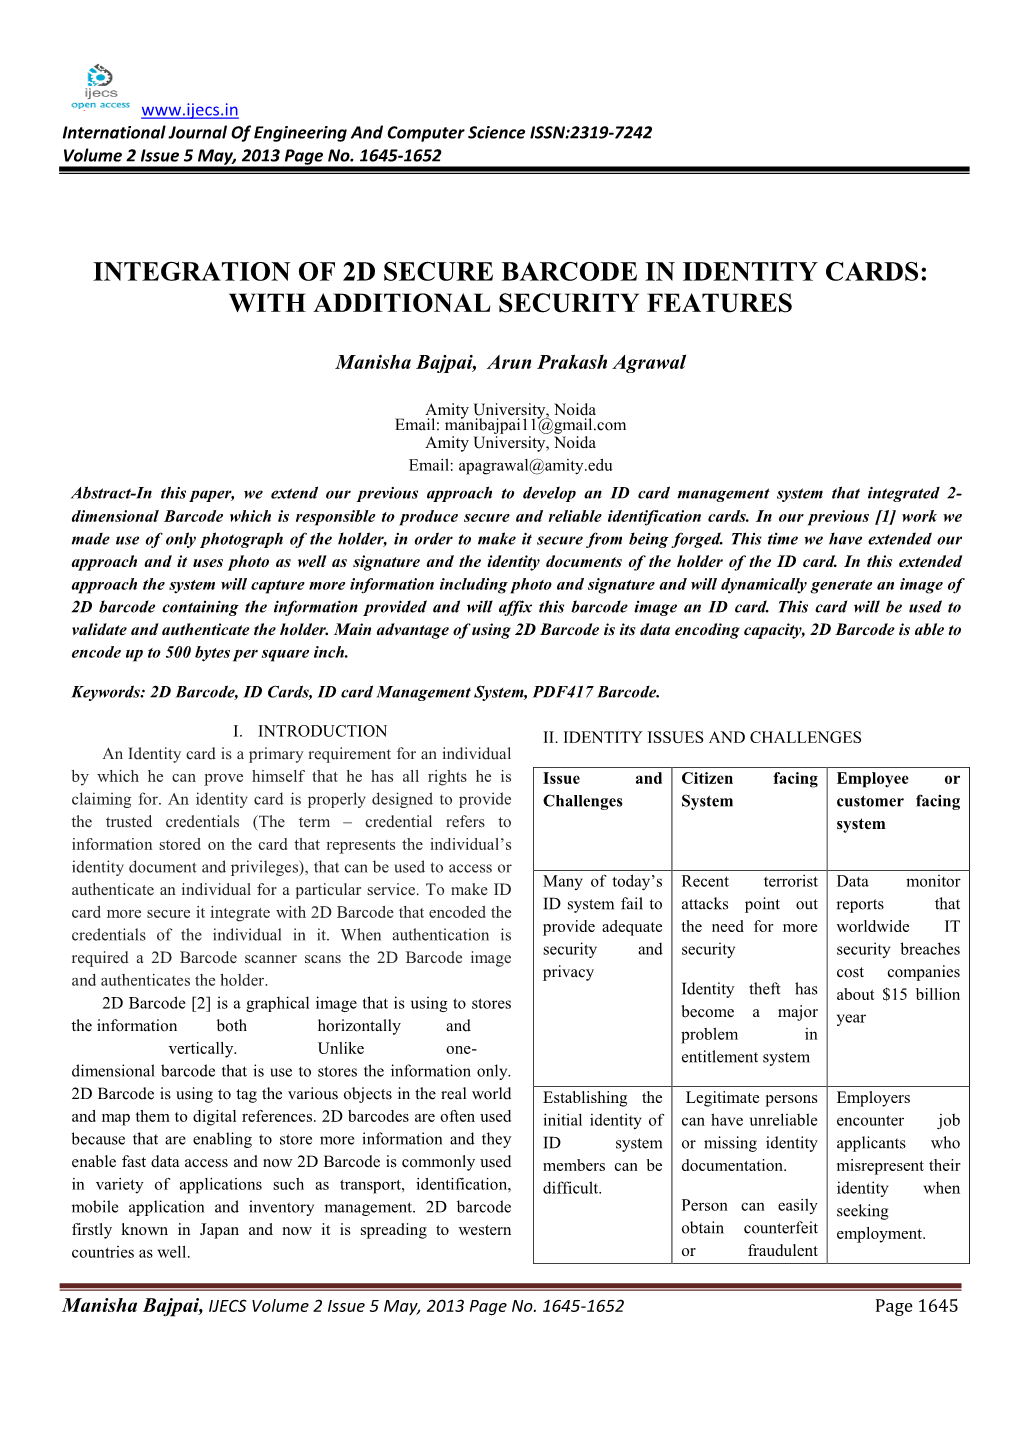 Integration of 2D Secure Barcode in Identity Cards: with Additional Security Features